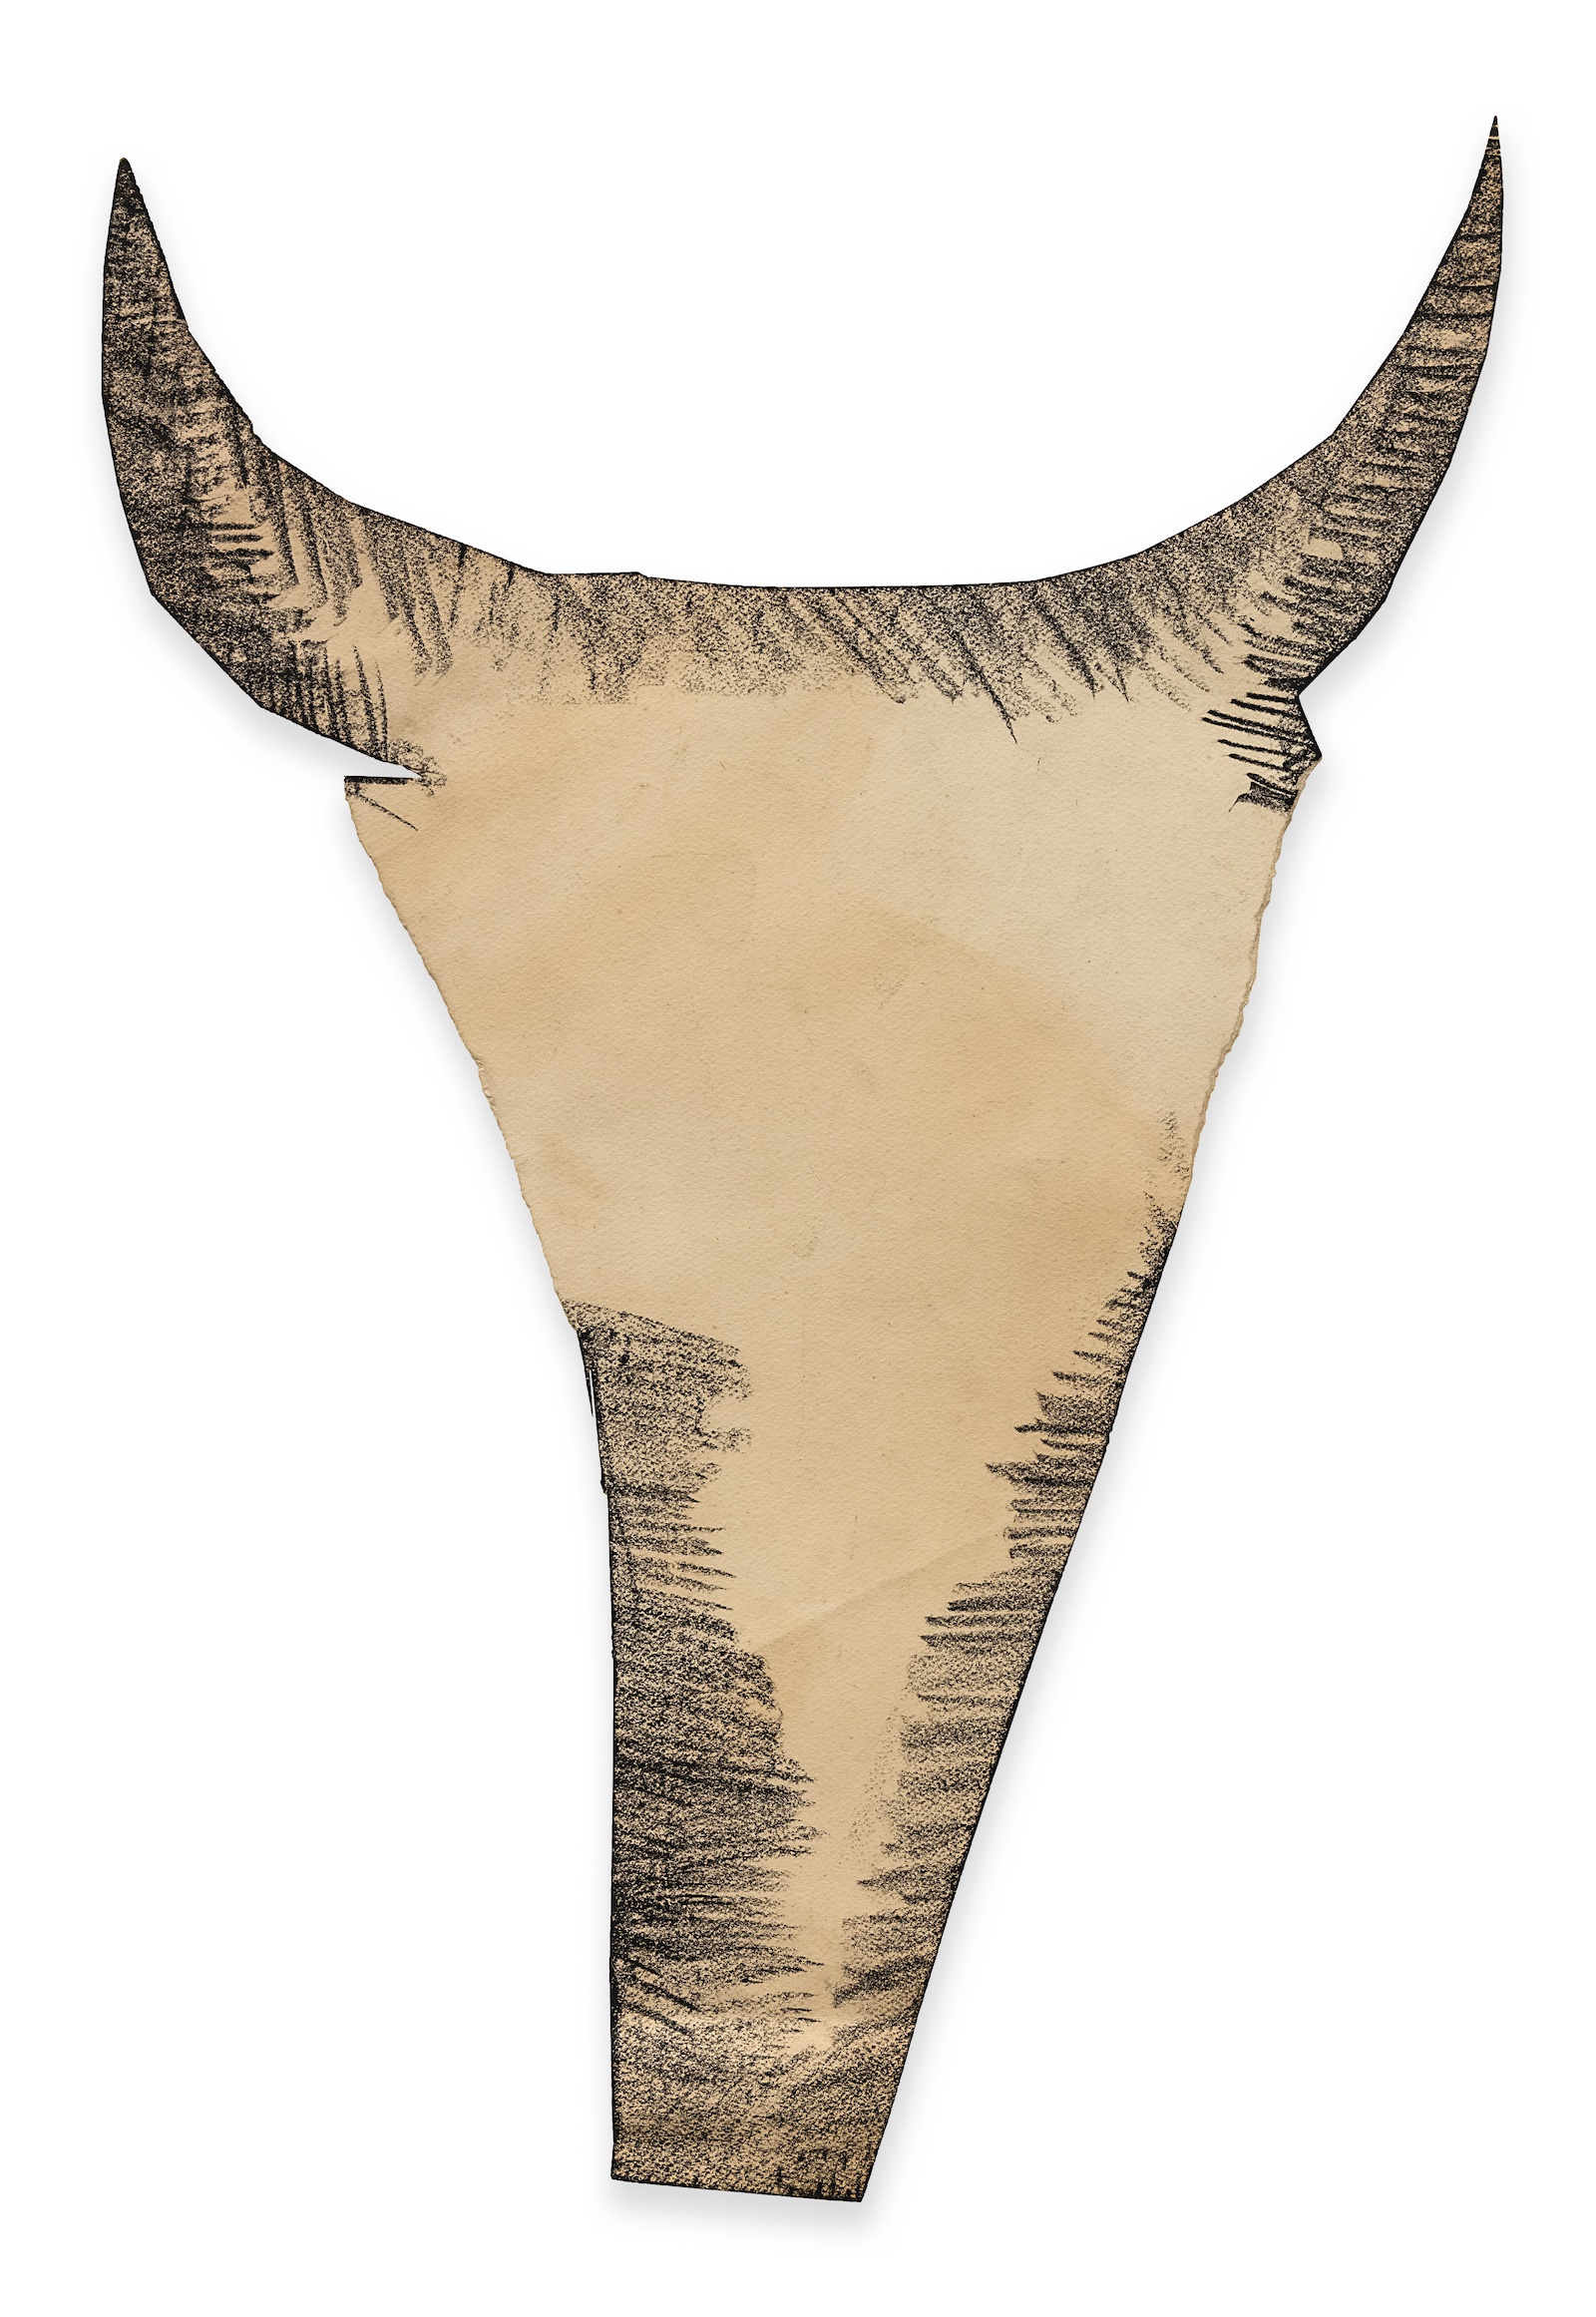 A beige paper cutout of a long, narrow bull's head with horns, the edges shaded in